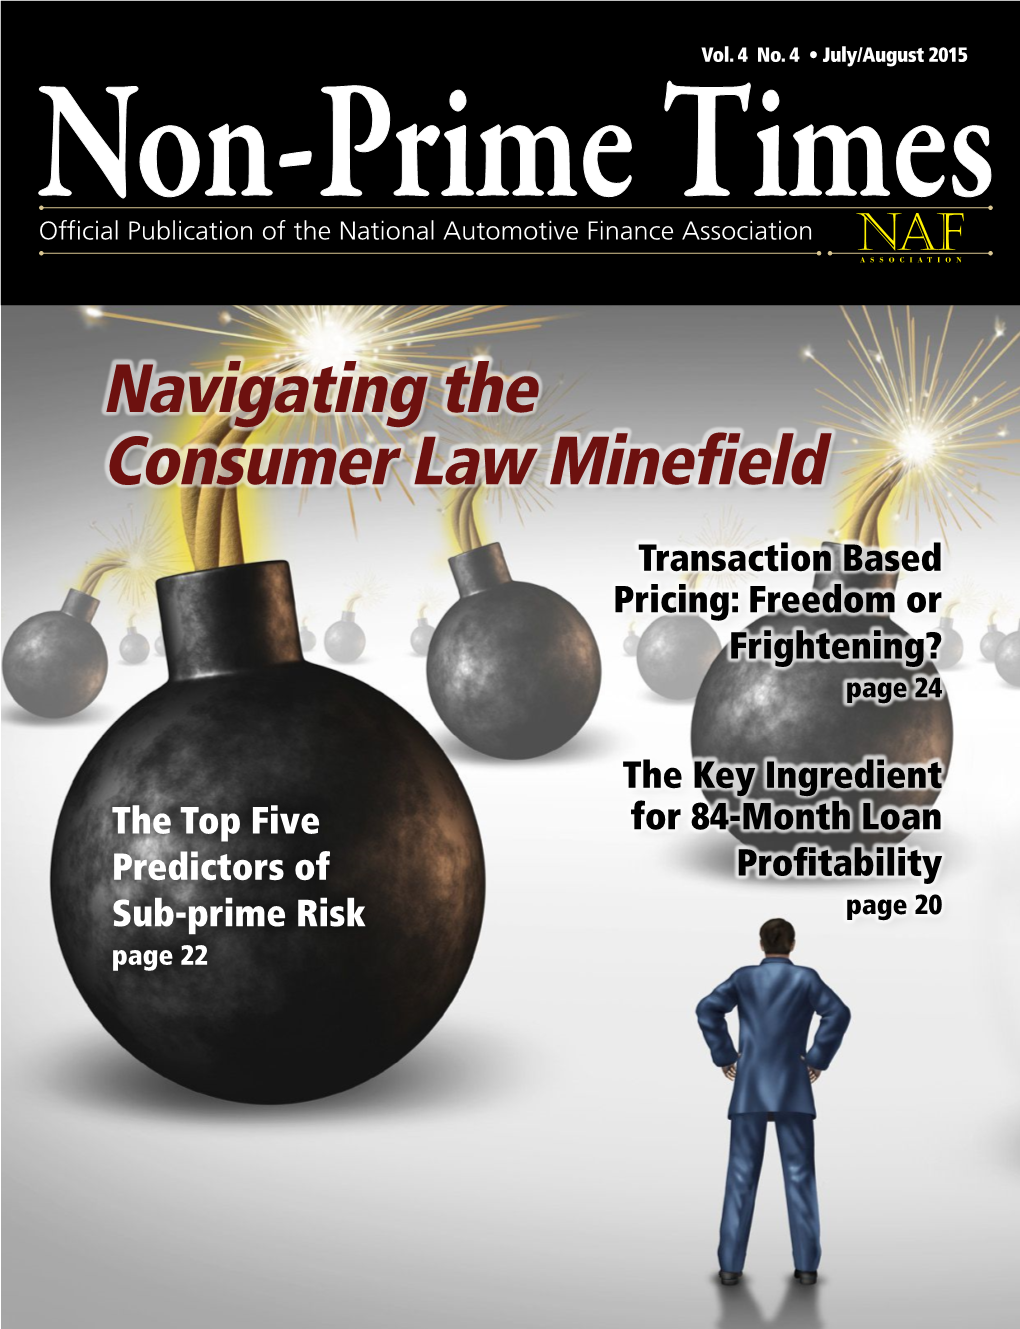 Navigating the Consumer Law Minefield